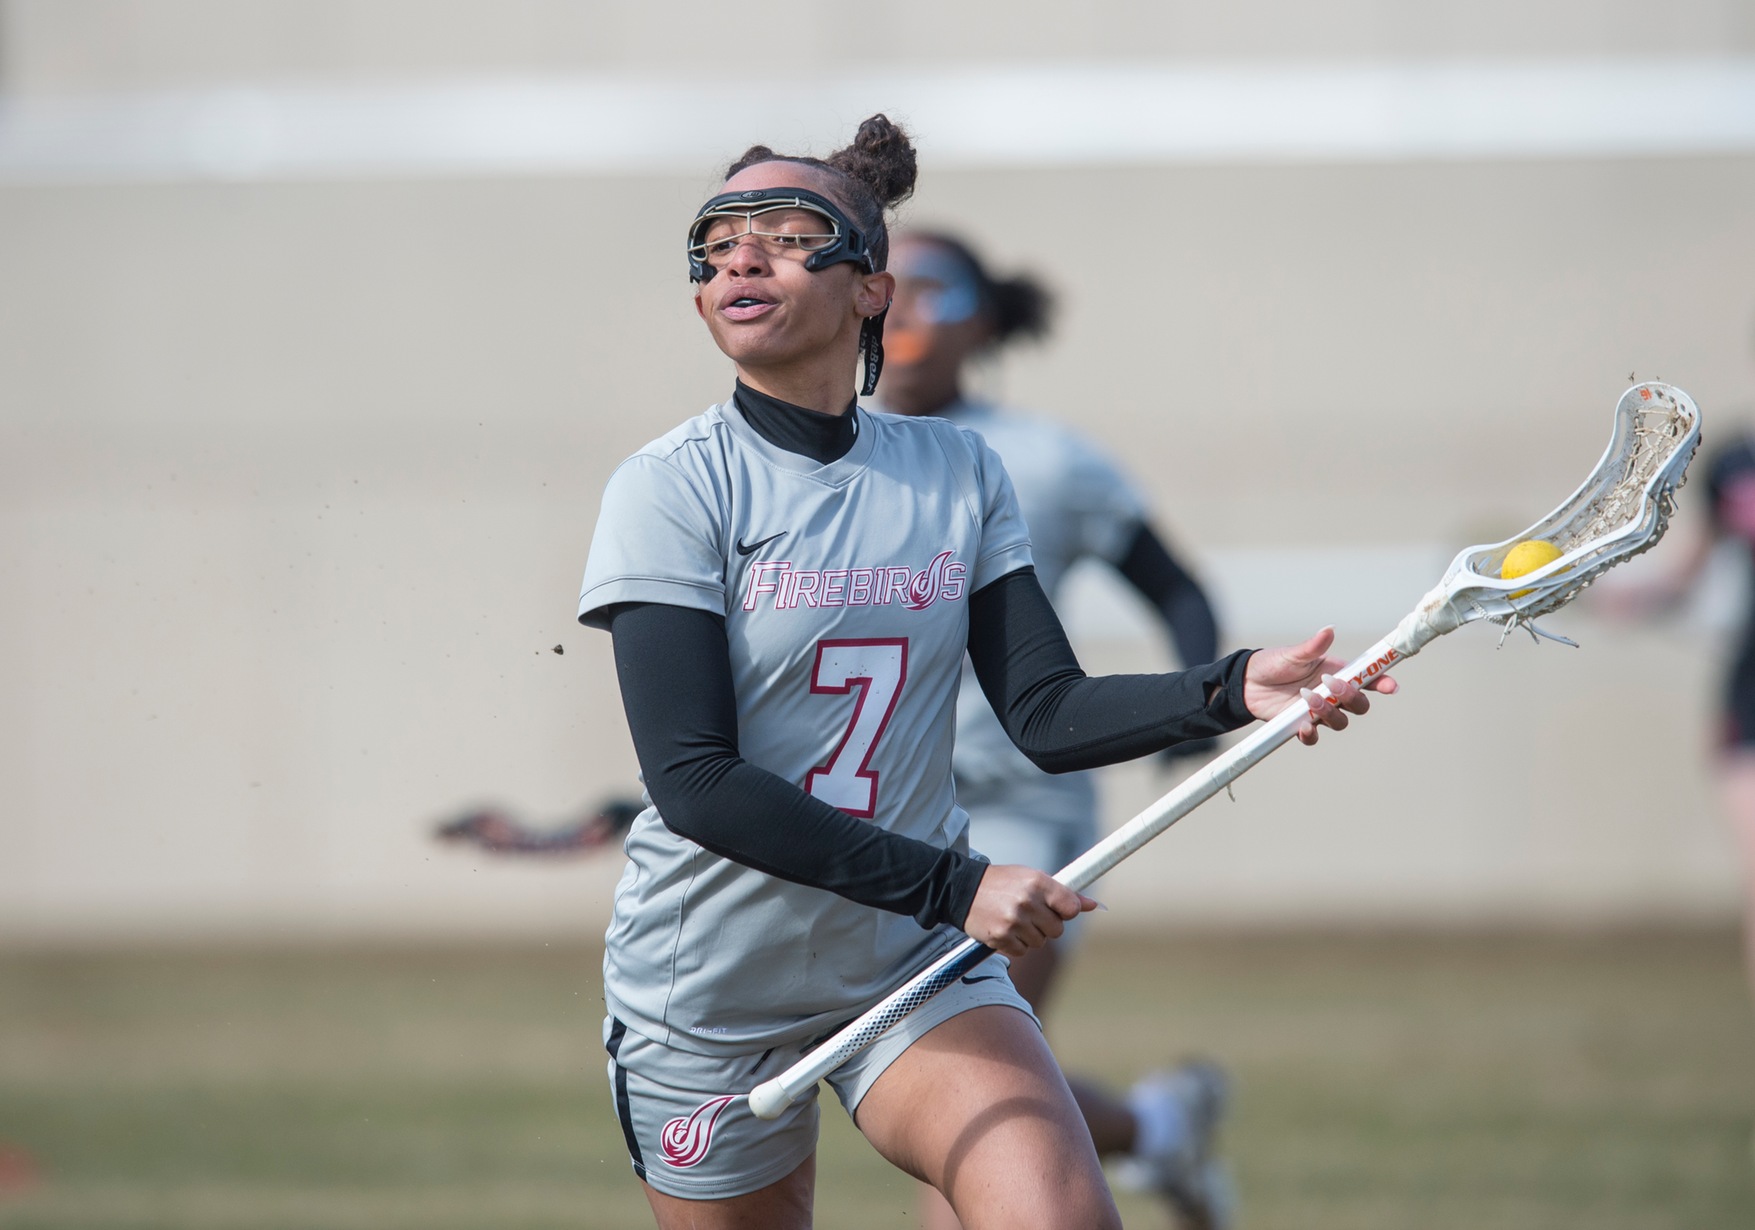 Kianna Franklin scored a season high two goals in match up against Holy Family.